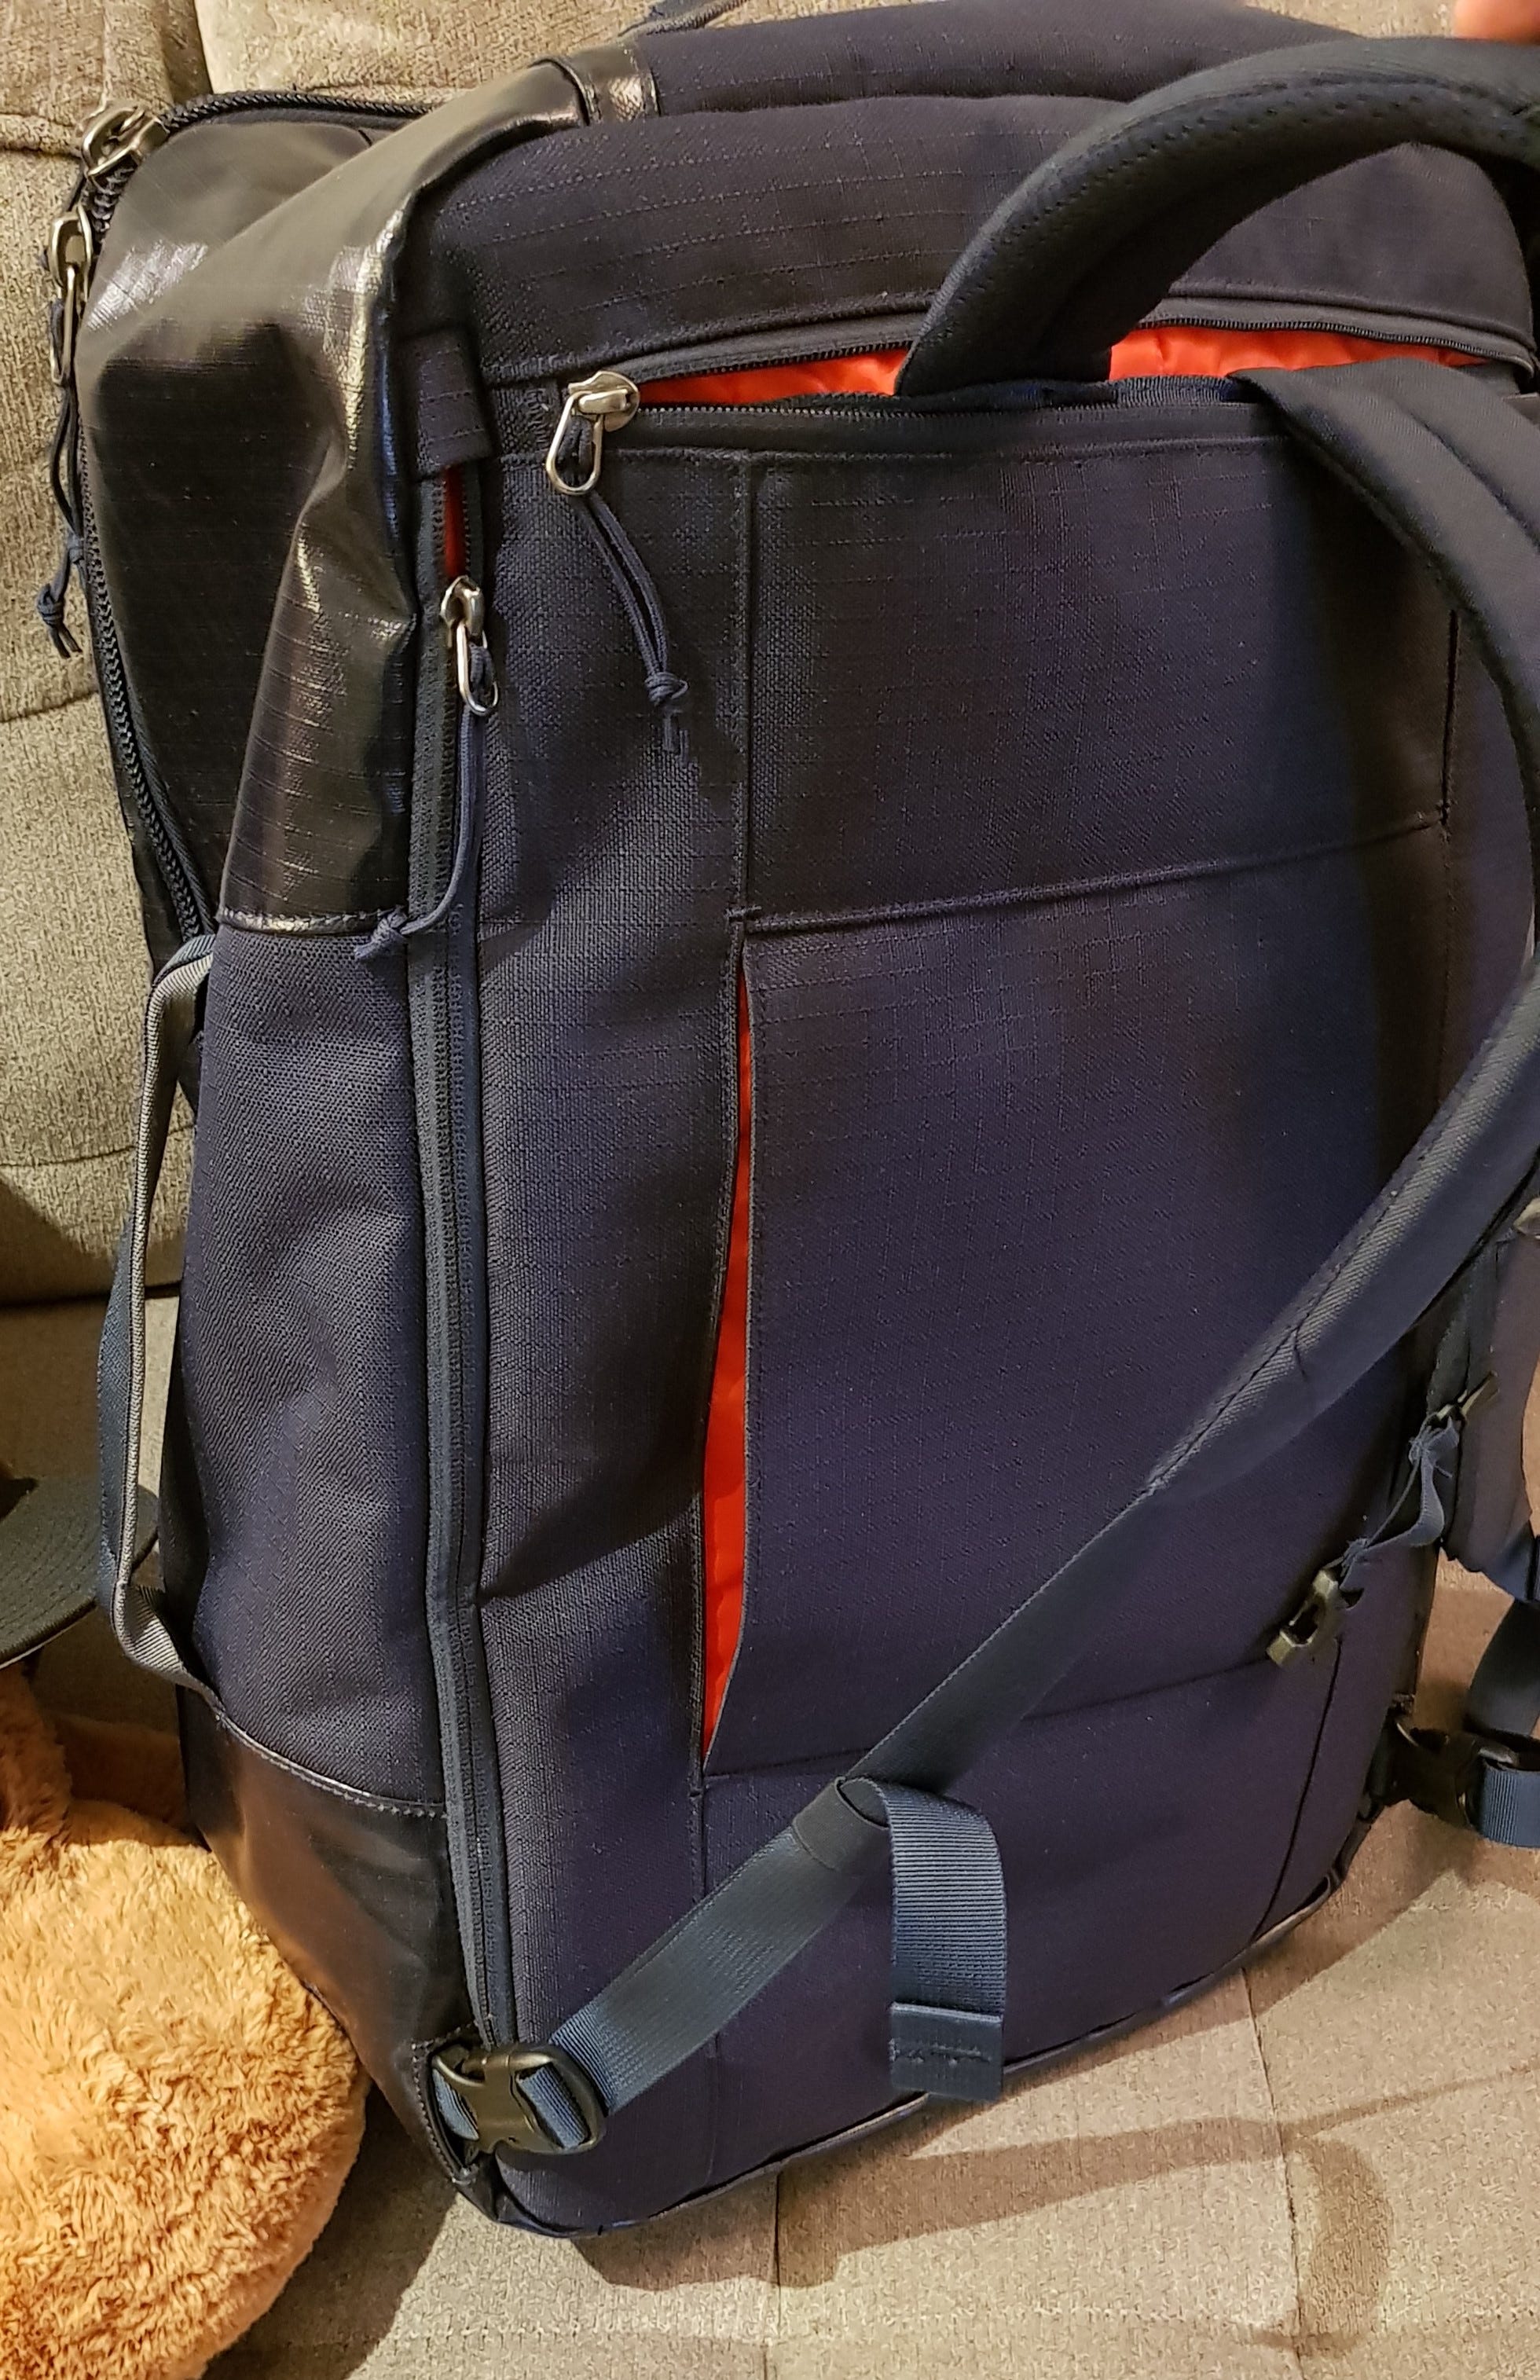 Patagonia Black Hole MLC 45 — The Bag That Fits Everything